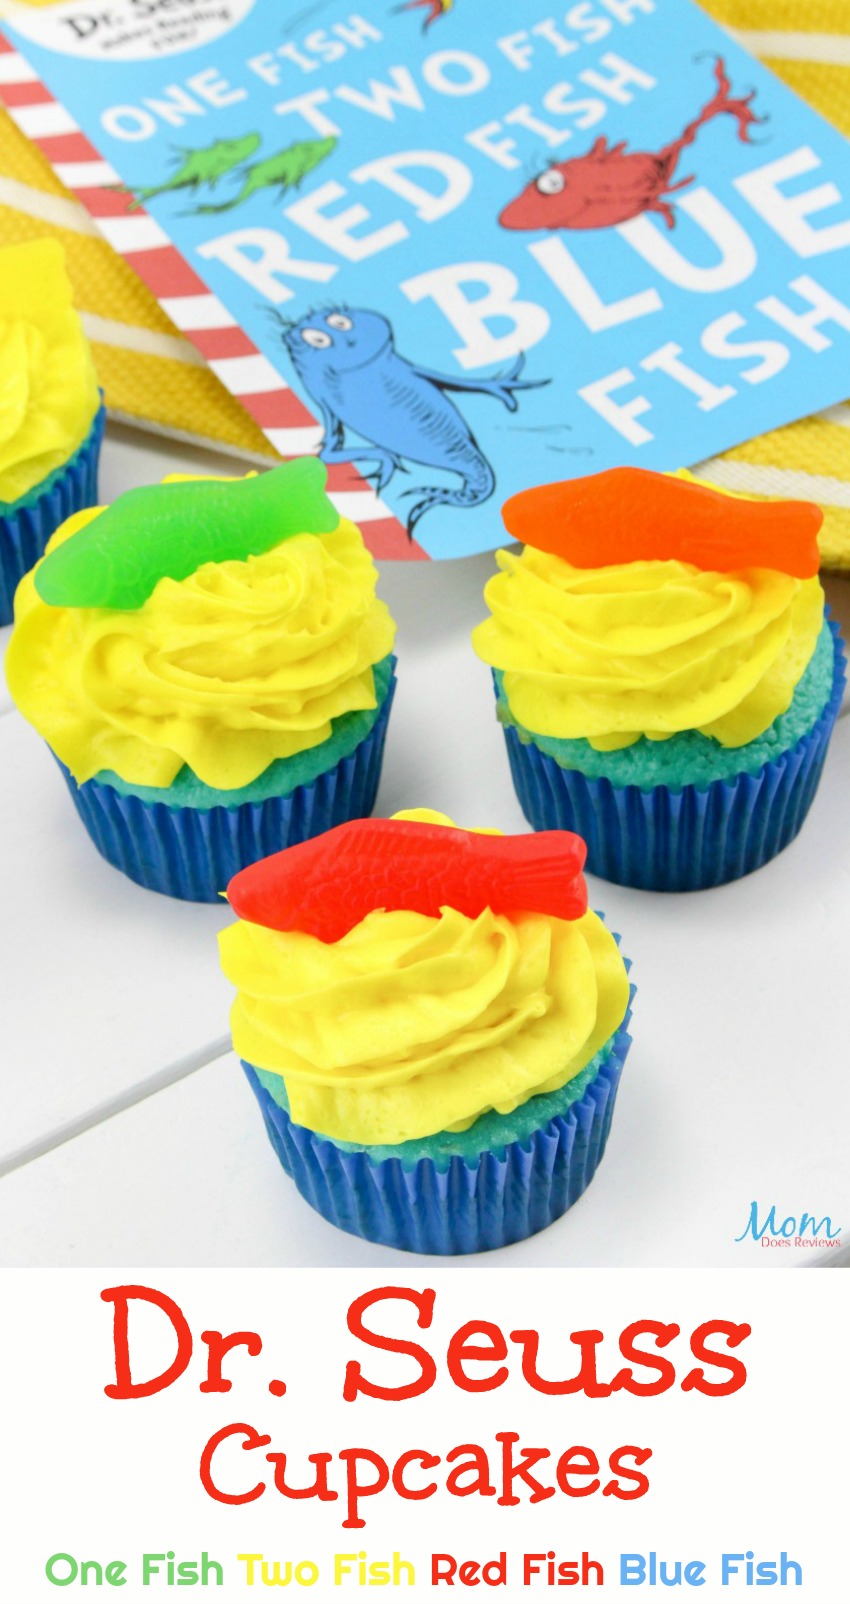 Dr. Seuss Cupcakes One Fish Two Fish Red Fish Blue Fish #drseuss #cupcakes #recipes #sweets #funfood #desserts